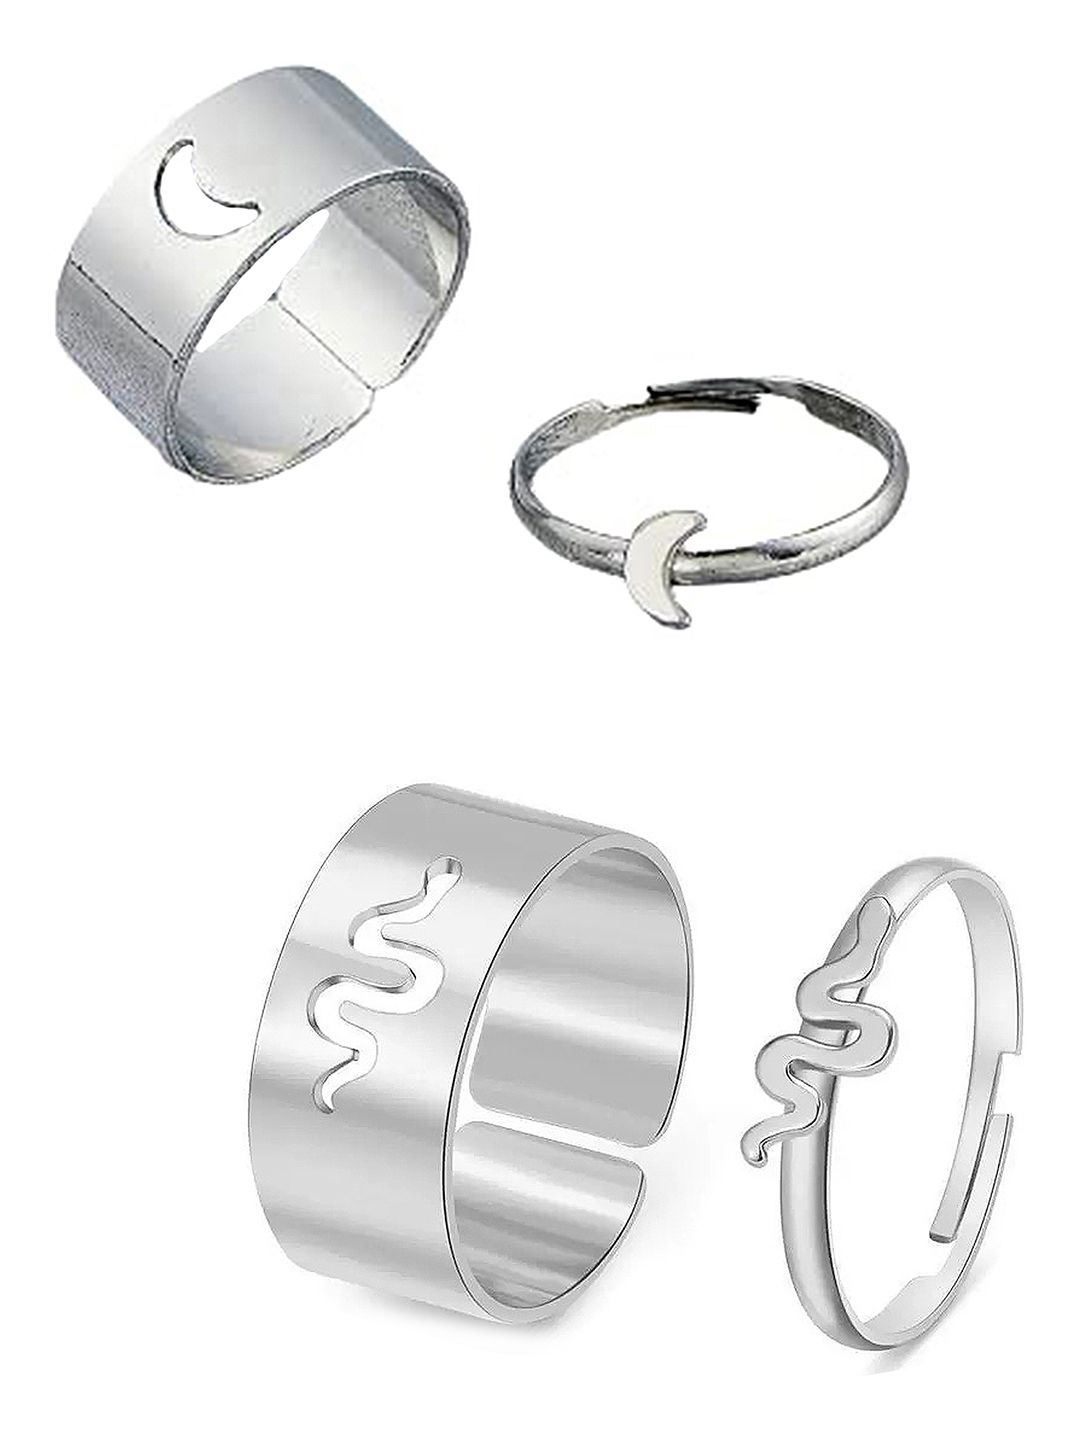 Vembley Set of 4 Silver-Plated Half Moon & Snake Adjustable Couple Rings Price in India